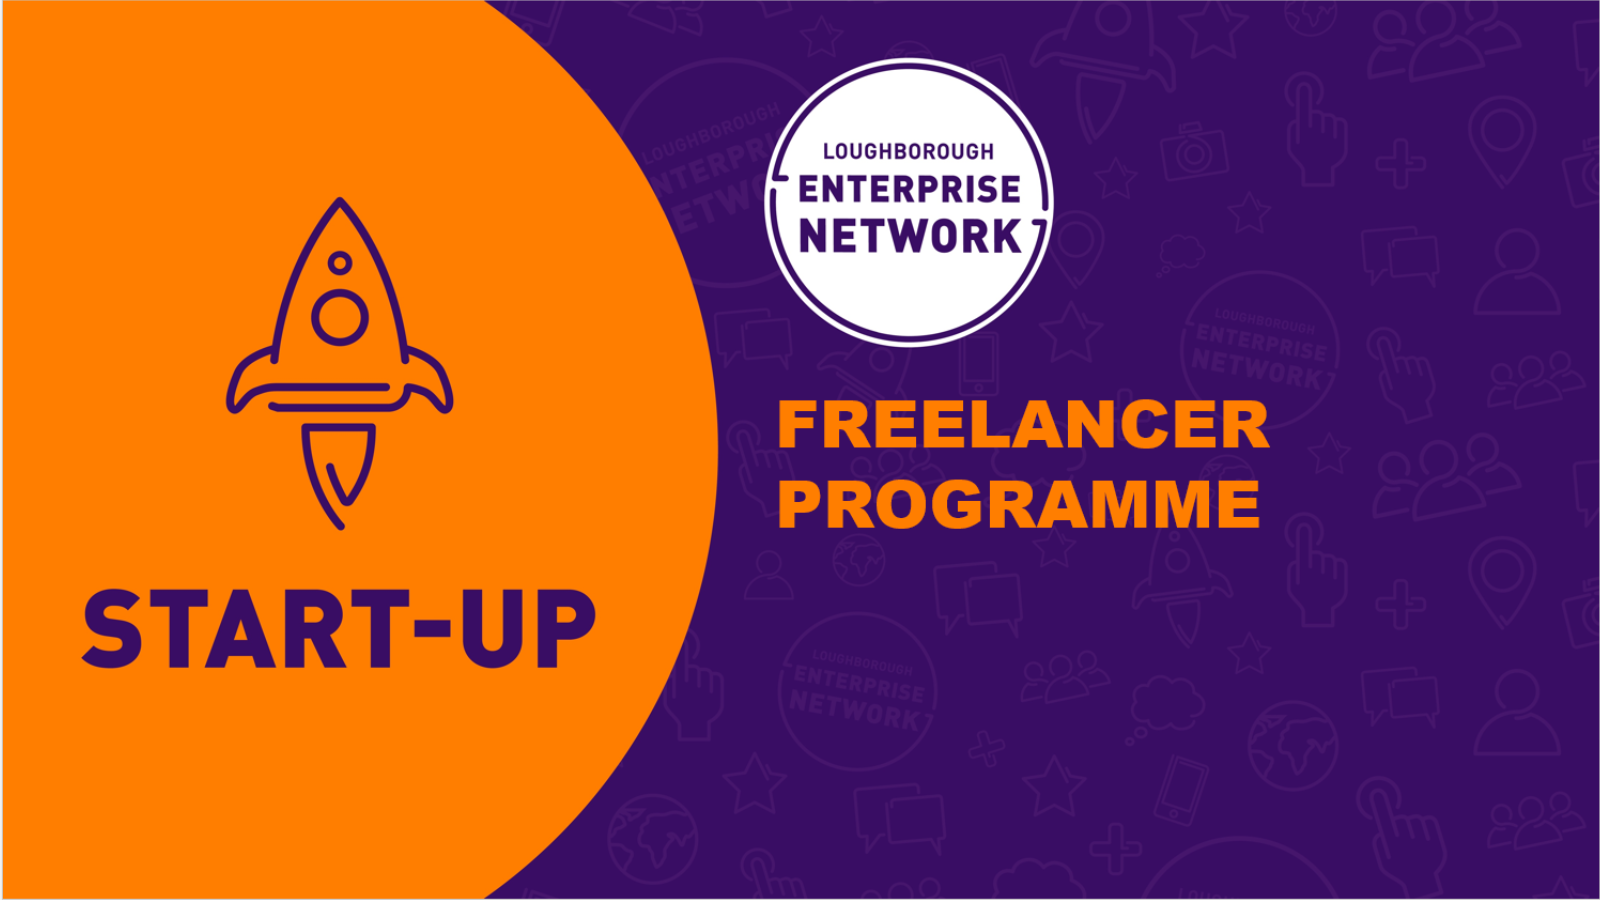 a orange semi circle on teh left of the picture containing a rocket and the words 'start up' the rest of the picture being a purpel background with a white circle logo with the words 'Loughborough enterprise network' and against the main purple background orange writing of 'freelancer programme'